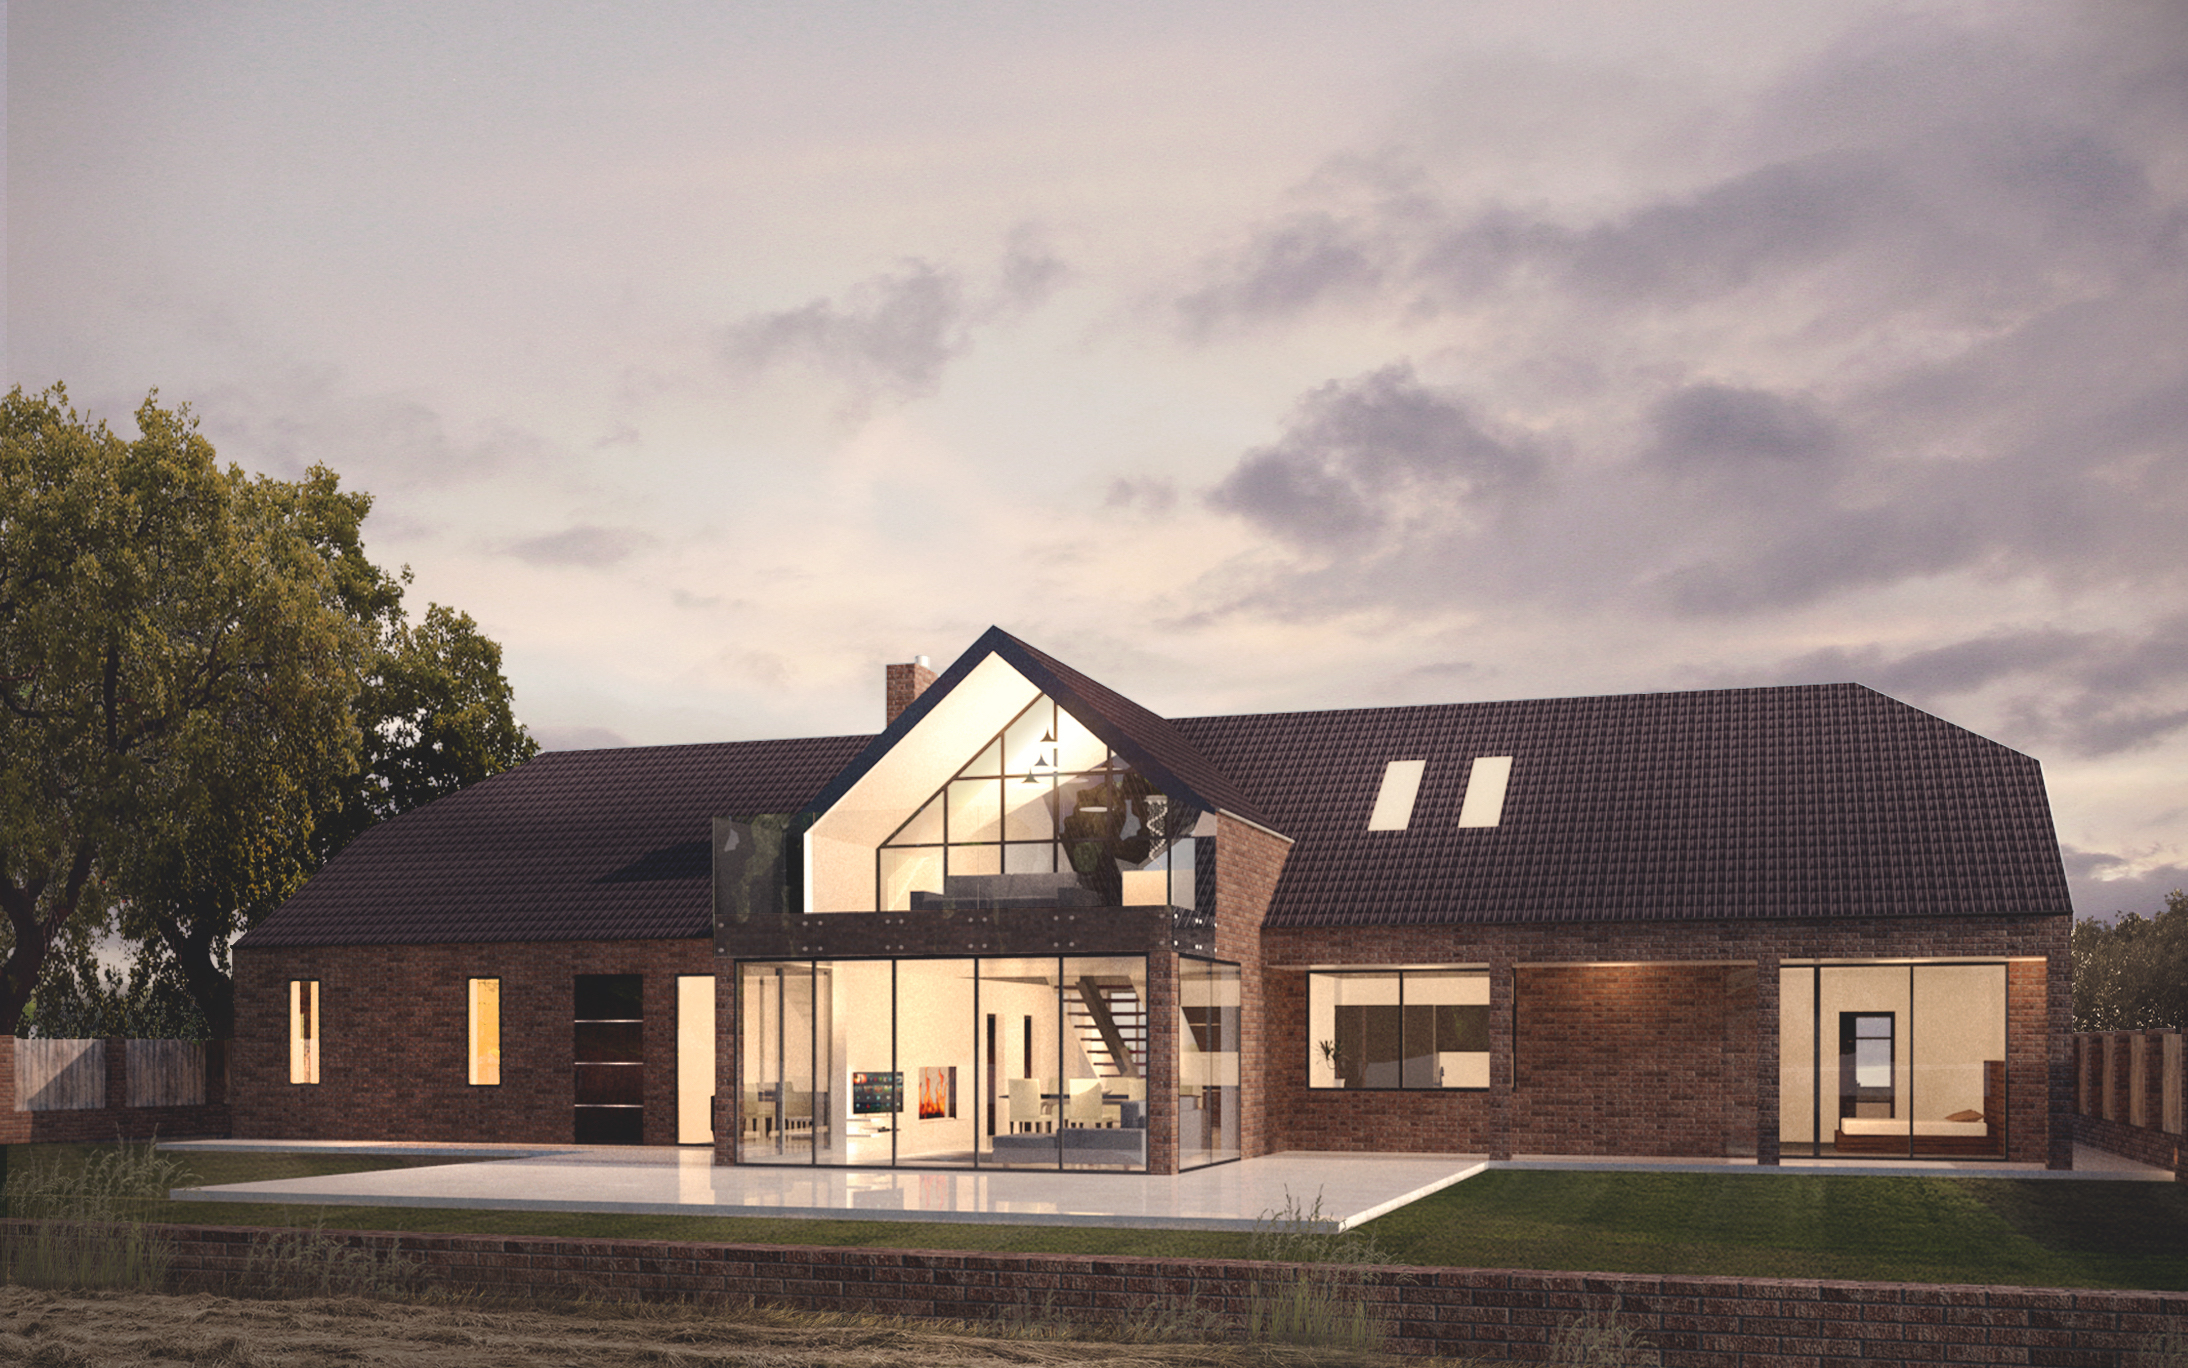 </p> <p>Find your ideal home design pro on designfor-me.com - get matched and see who's interested in your home project. Click image to see more inspiration from our design pros</p> <p>Design by Callum, architectural designer from South Staffordshire, West Midlands</p> <p>#architecture #homedesign #modernhomes #homeinspiration #glazing #architecturalglazing #naturallight #barnconversions </p> <p>